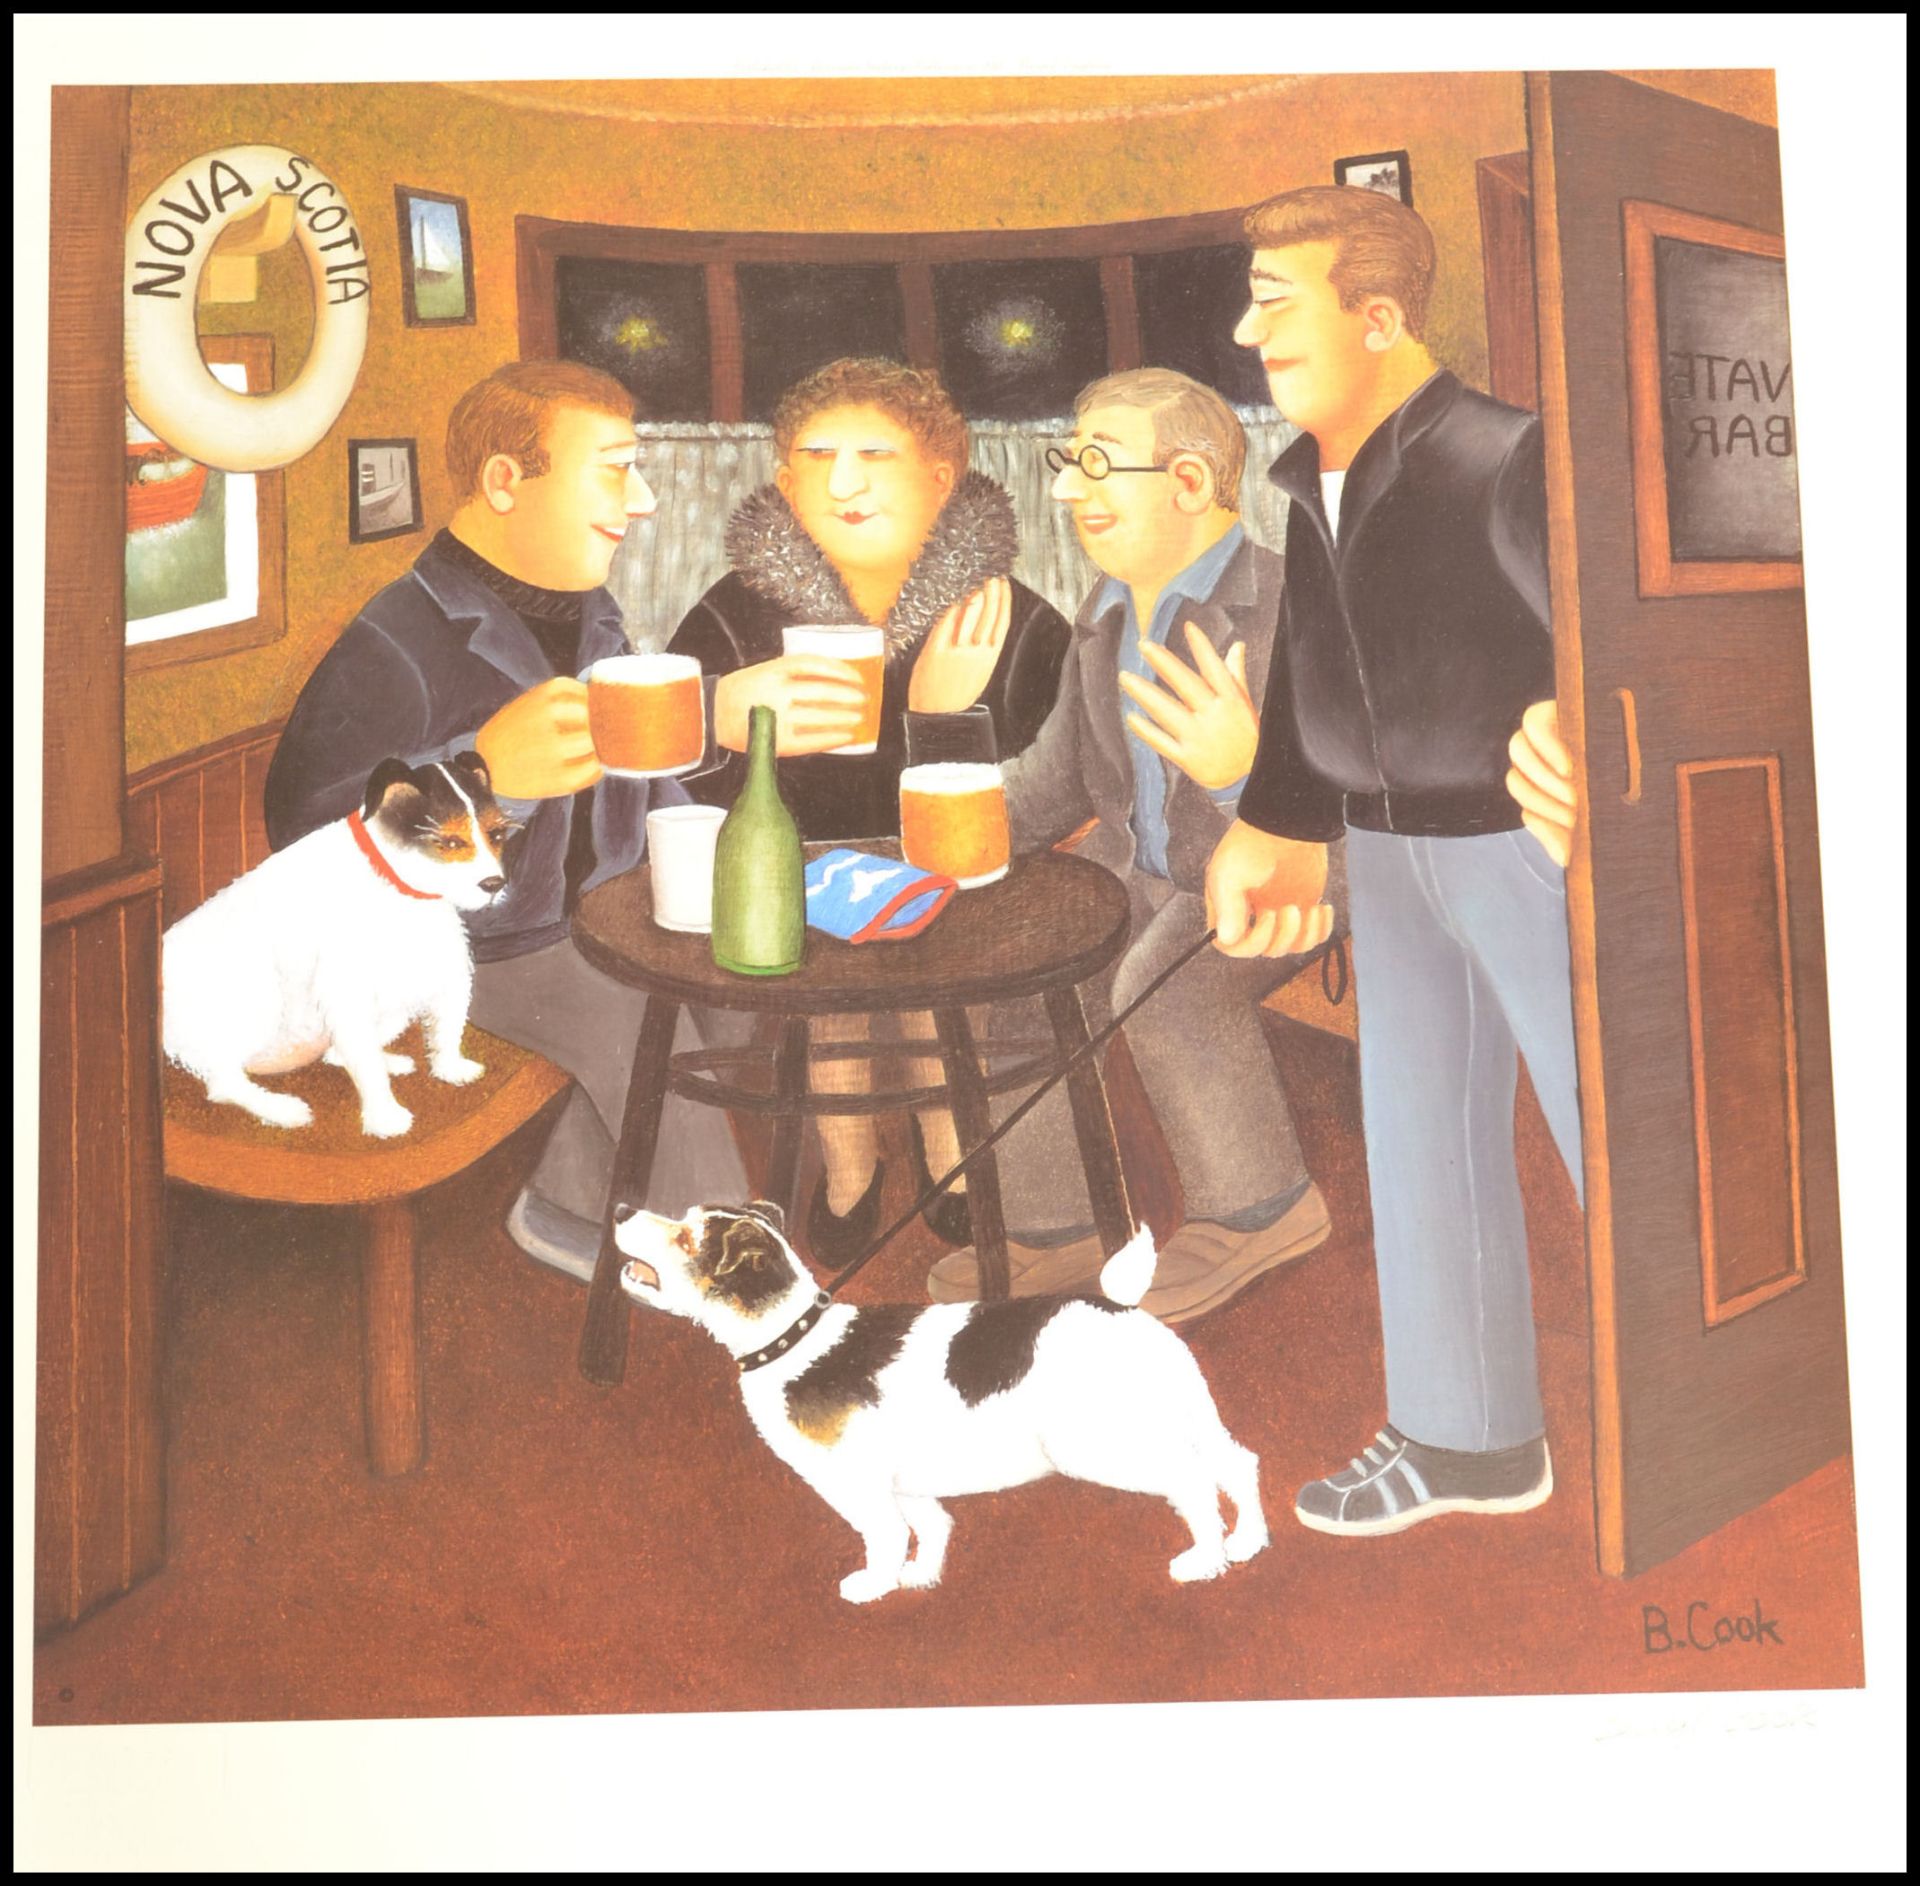 A limited edition Beryl Cook signed print entitled